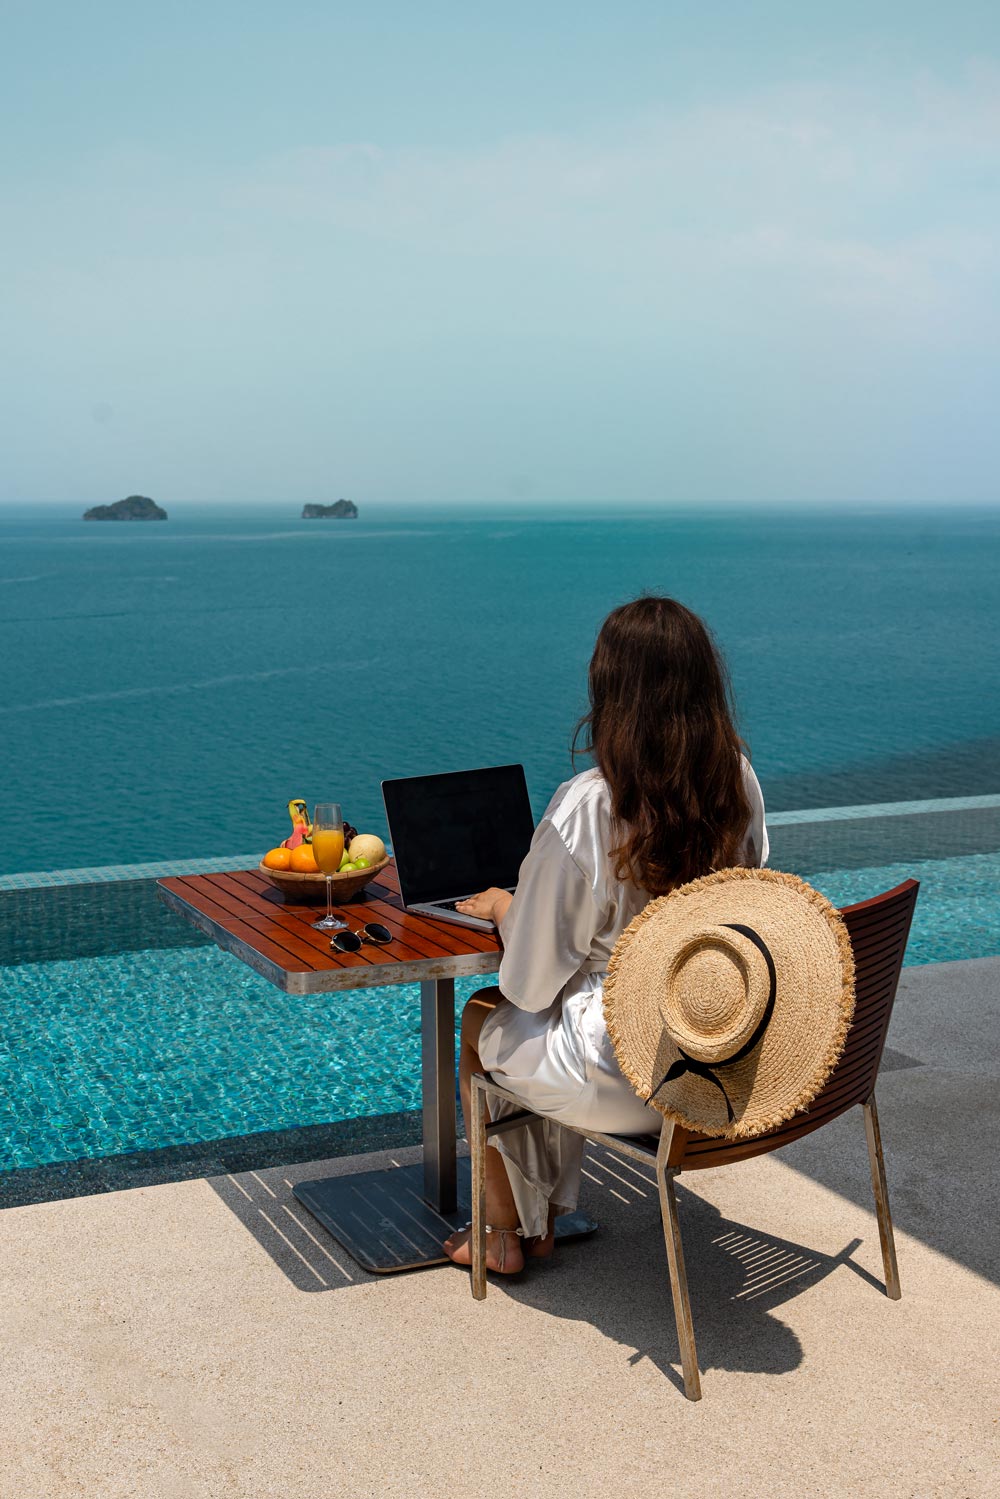 A woman wearing a white robe sits at a table by an infinity pool overlooking the ocean, working on a laptop. A straw hat rests on the back of her chair, and a bowl of fresh fruit and a glass of juice are on the table, suggesting a relaxing yet productive setting.